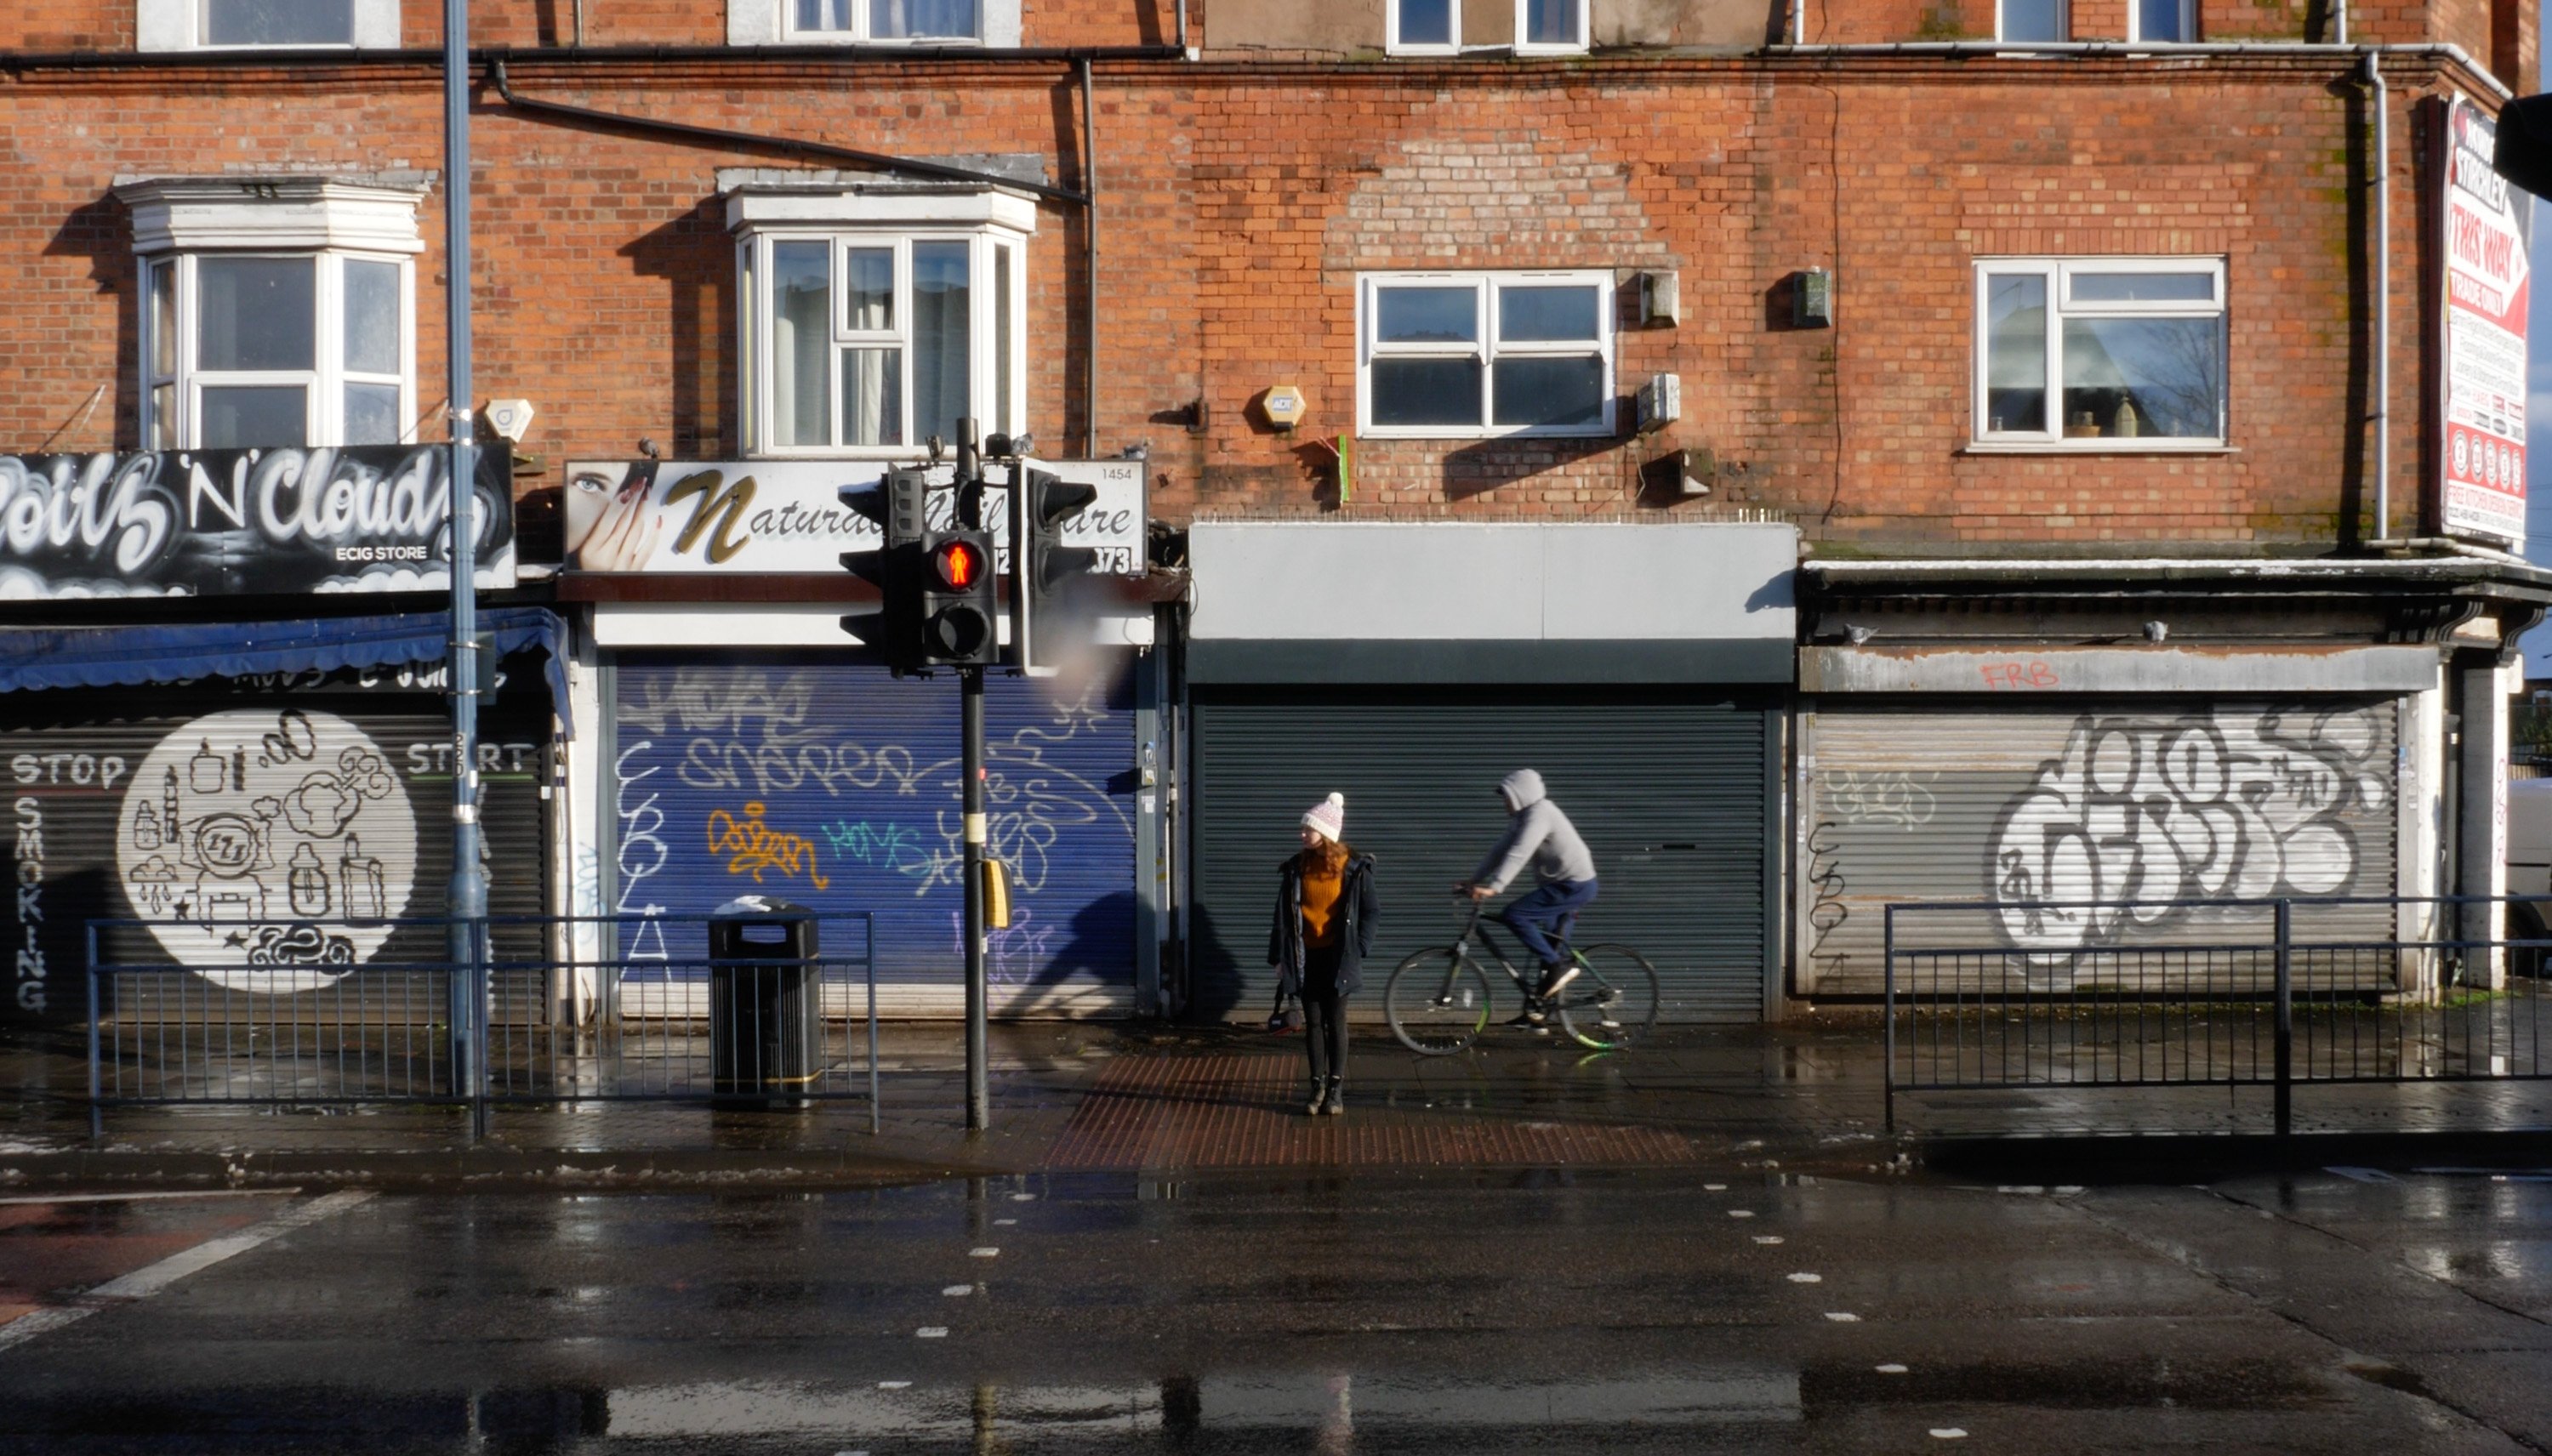 Woman stands waiting at a pelican crossing as a cyclist passes behind her on the pavement. Behind her along the street, shops are closed and most of the shop front security shutters have graffiti.